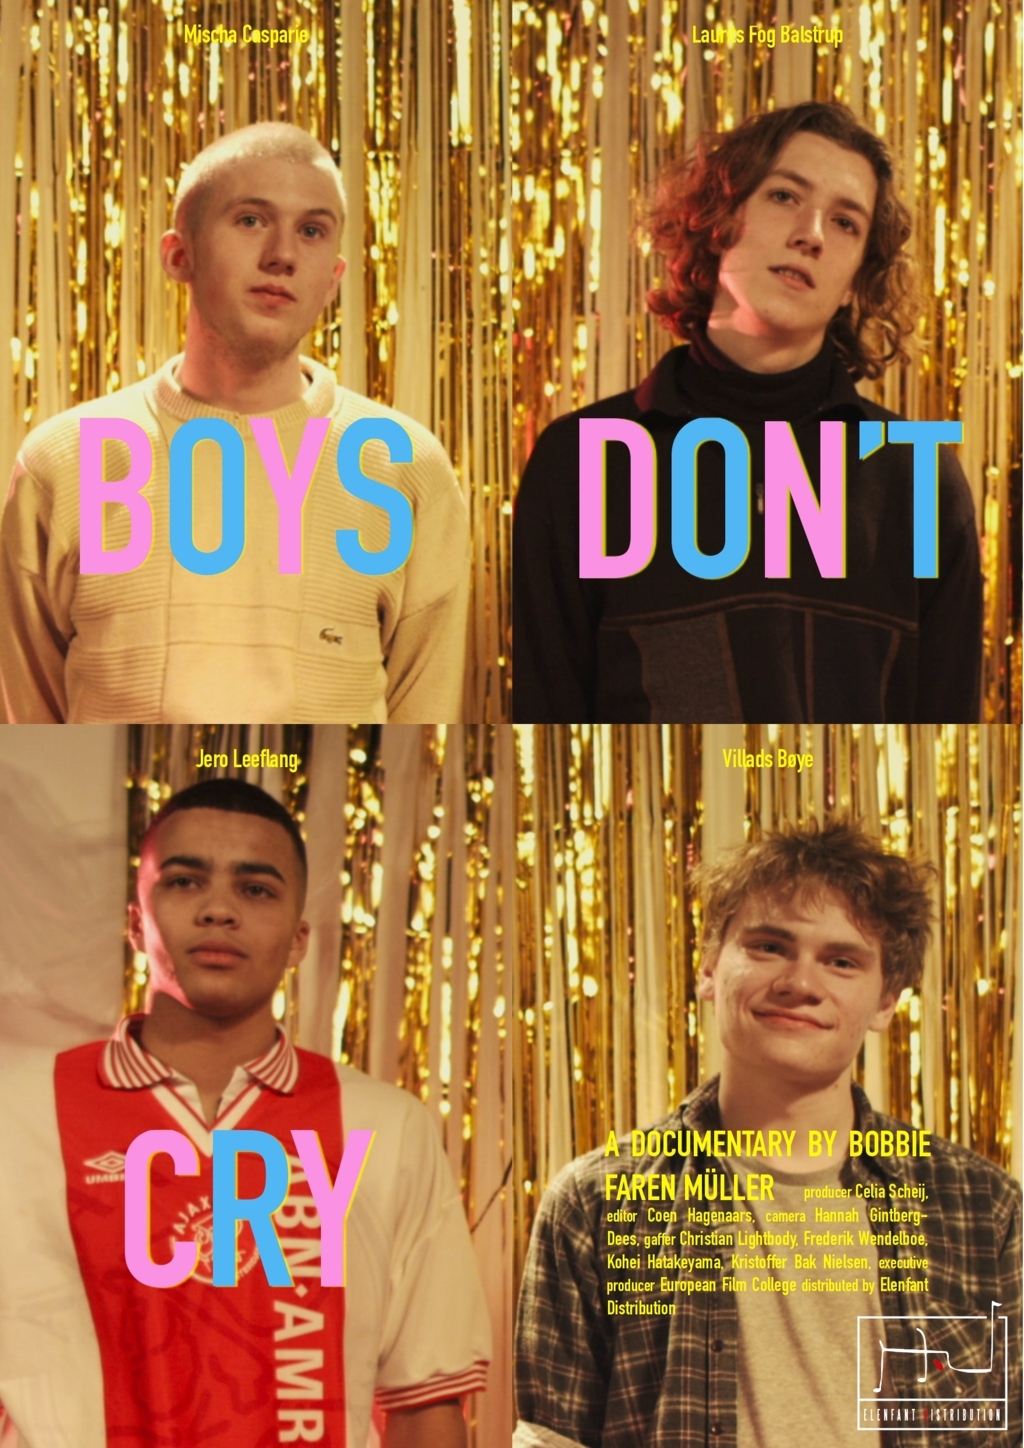 Boys Don’t Cry<h3 style="font-size:10px; line-height:20px;"> di Bobbie Faren Müller</h3>